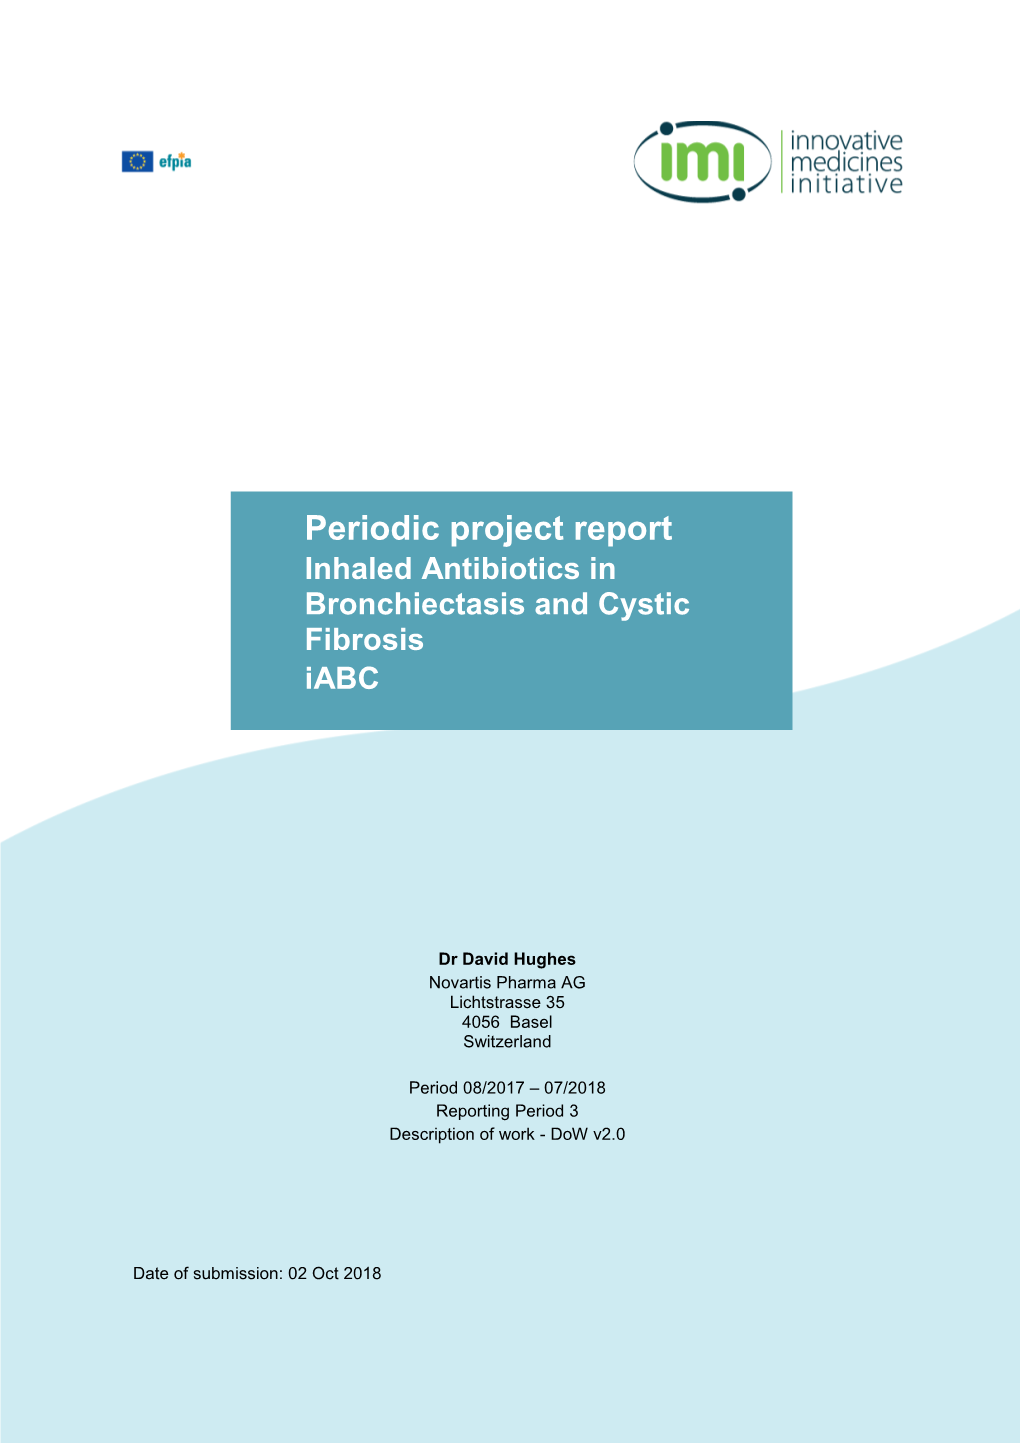 Periodic Project Report Inhaled Antibiotics in Bronchiectasis and Cystic Fibrosis Iabc